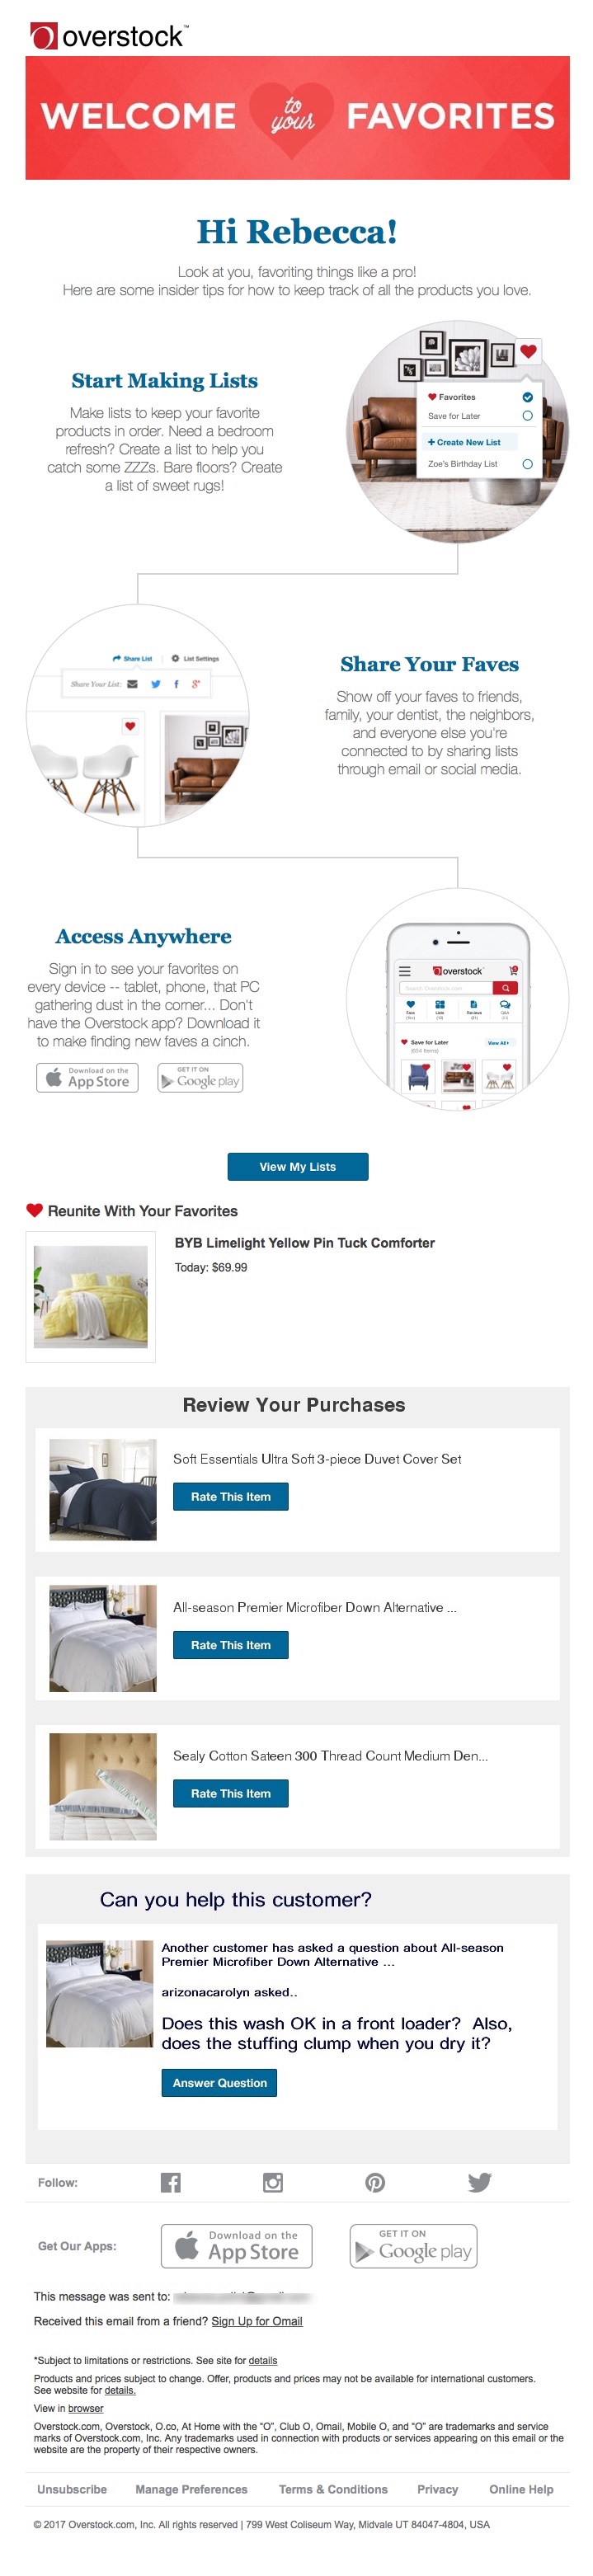 Get the Click - Overstock.com Email Review